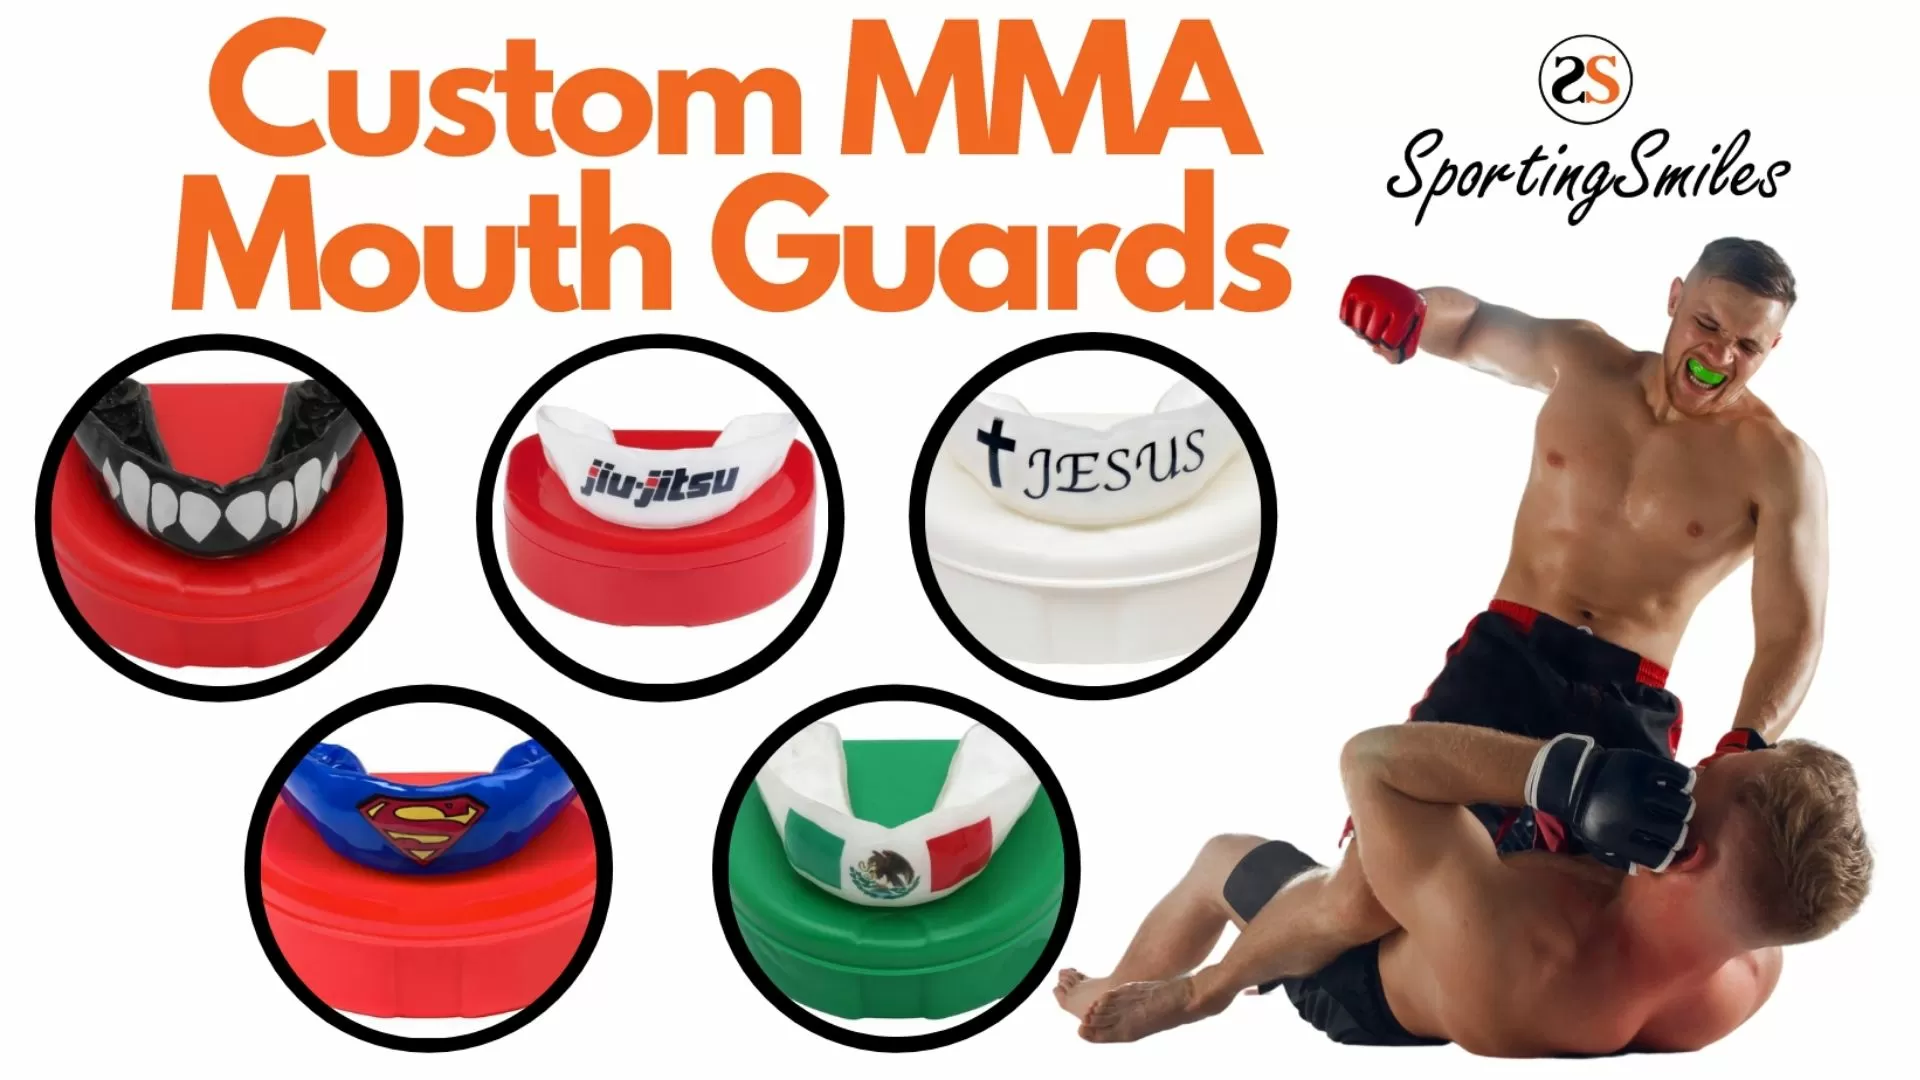 Custom MMA Mouth guards at Sporting Smiles